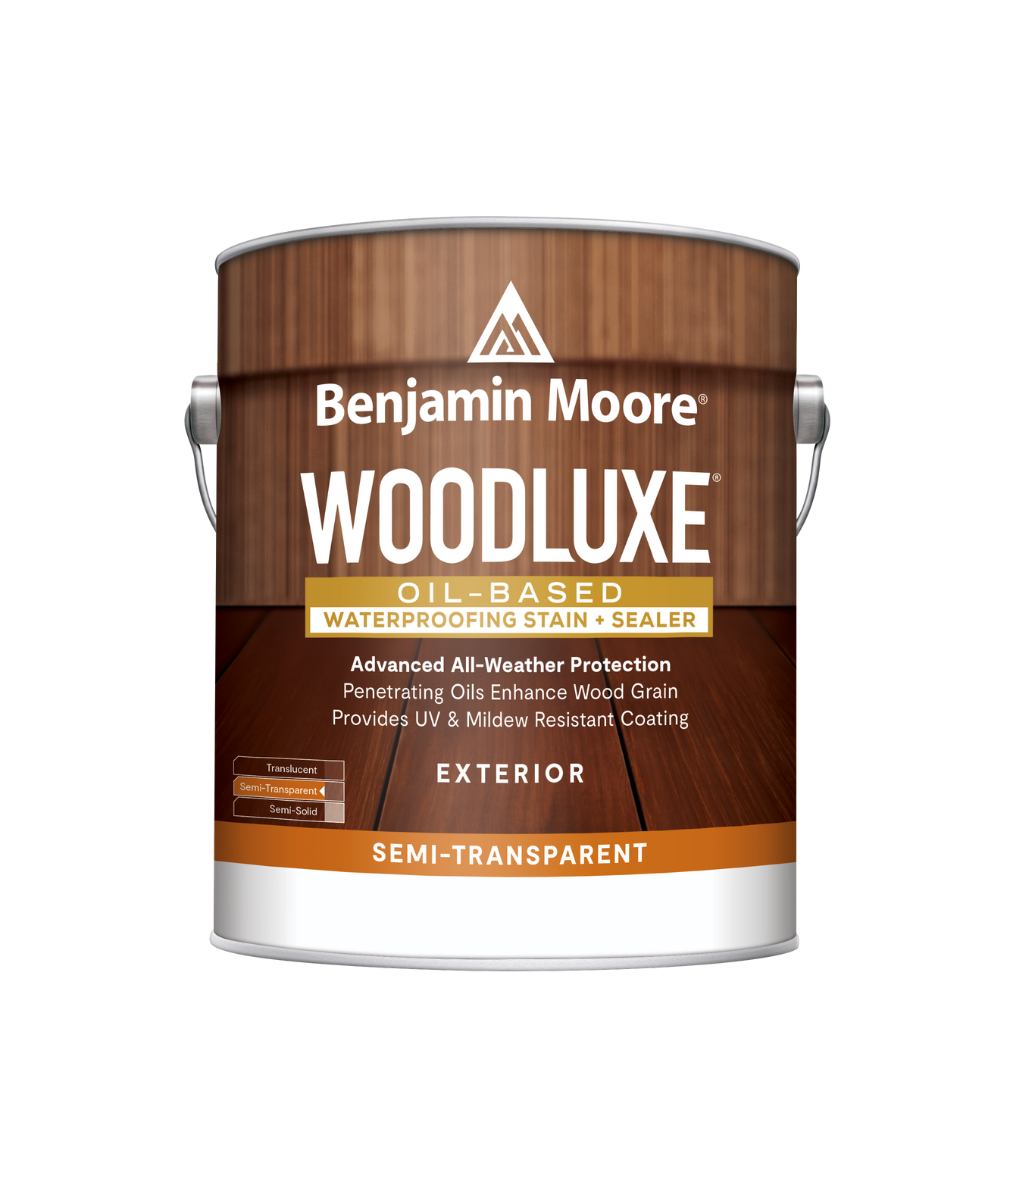 Benjamin Moore Woodluxe® Oil-Based Semi-Transparent Exterior Stain available to shop at Regal Paint Centers in Maryland, Virginia and DC.